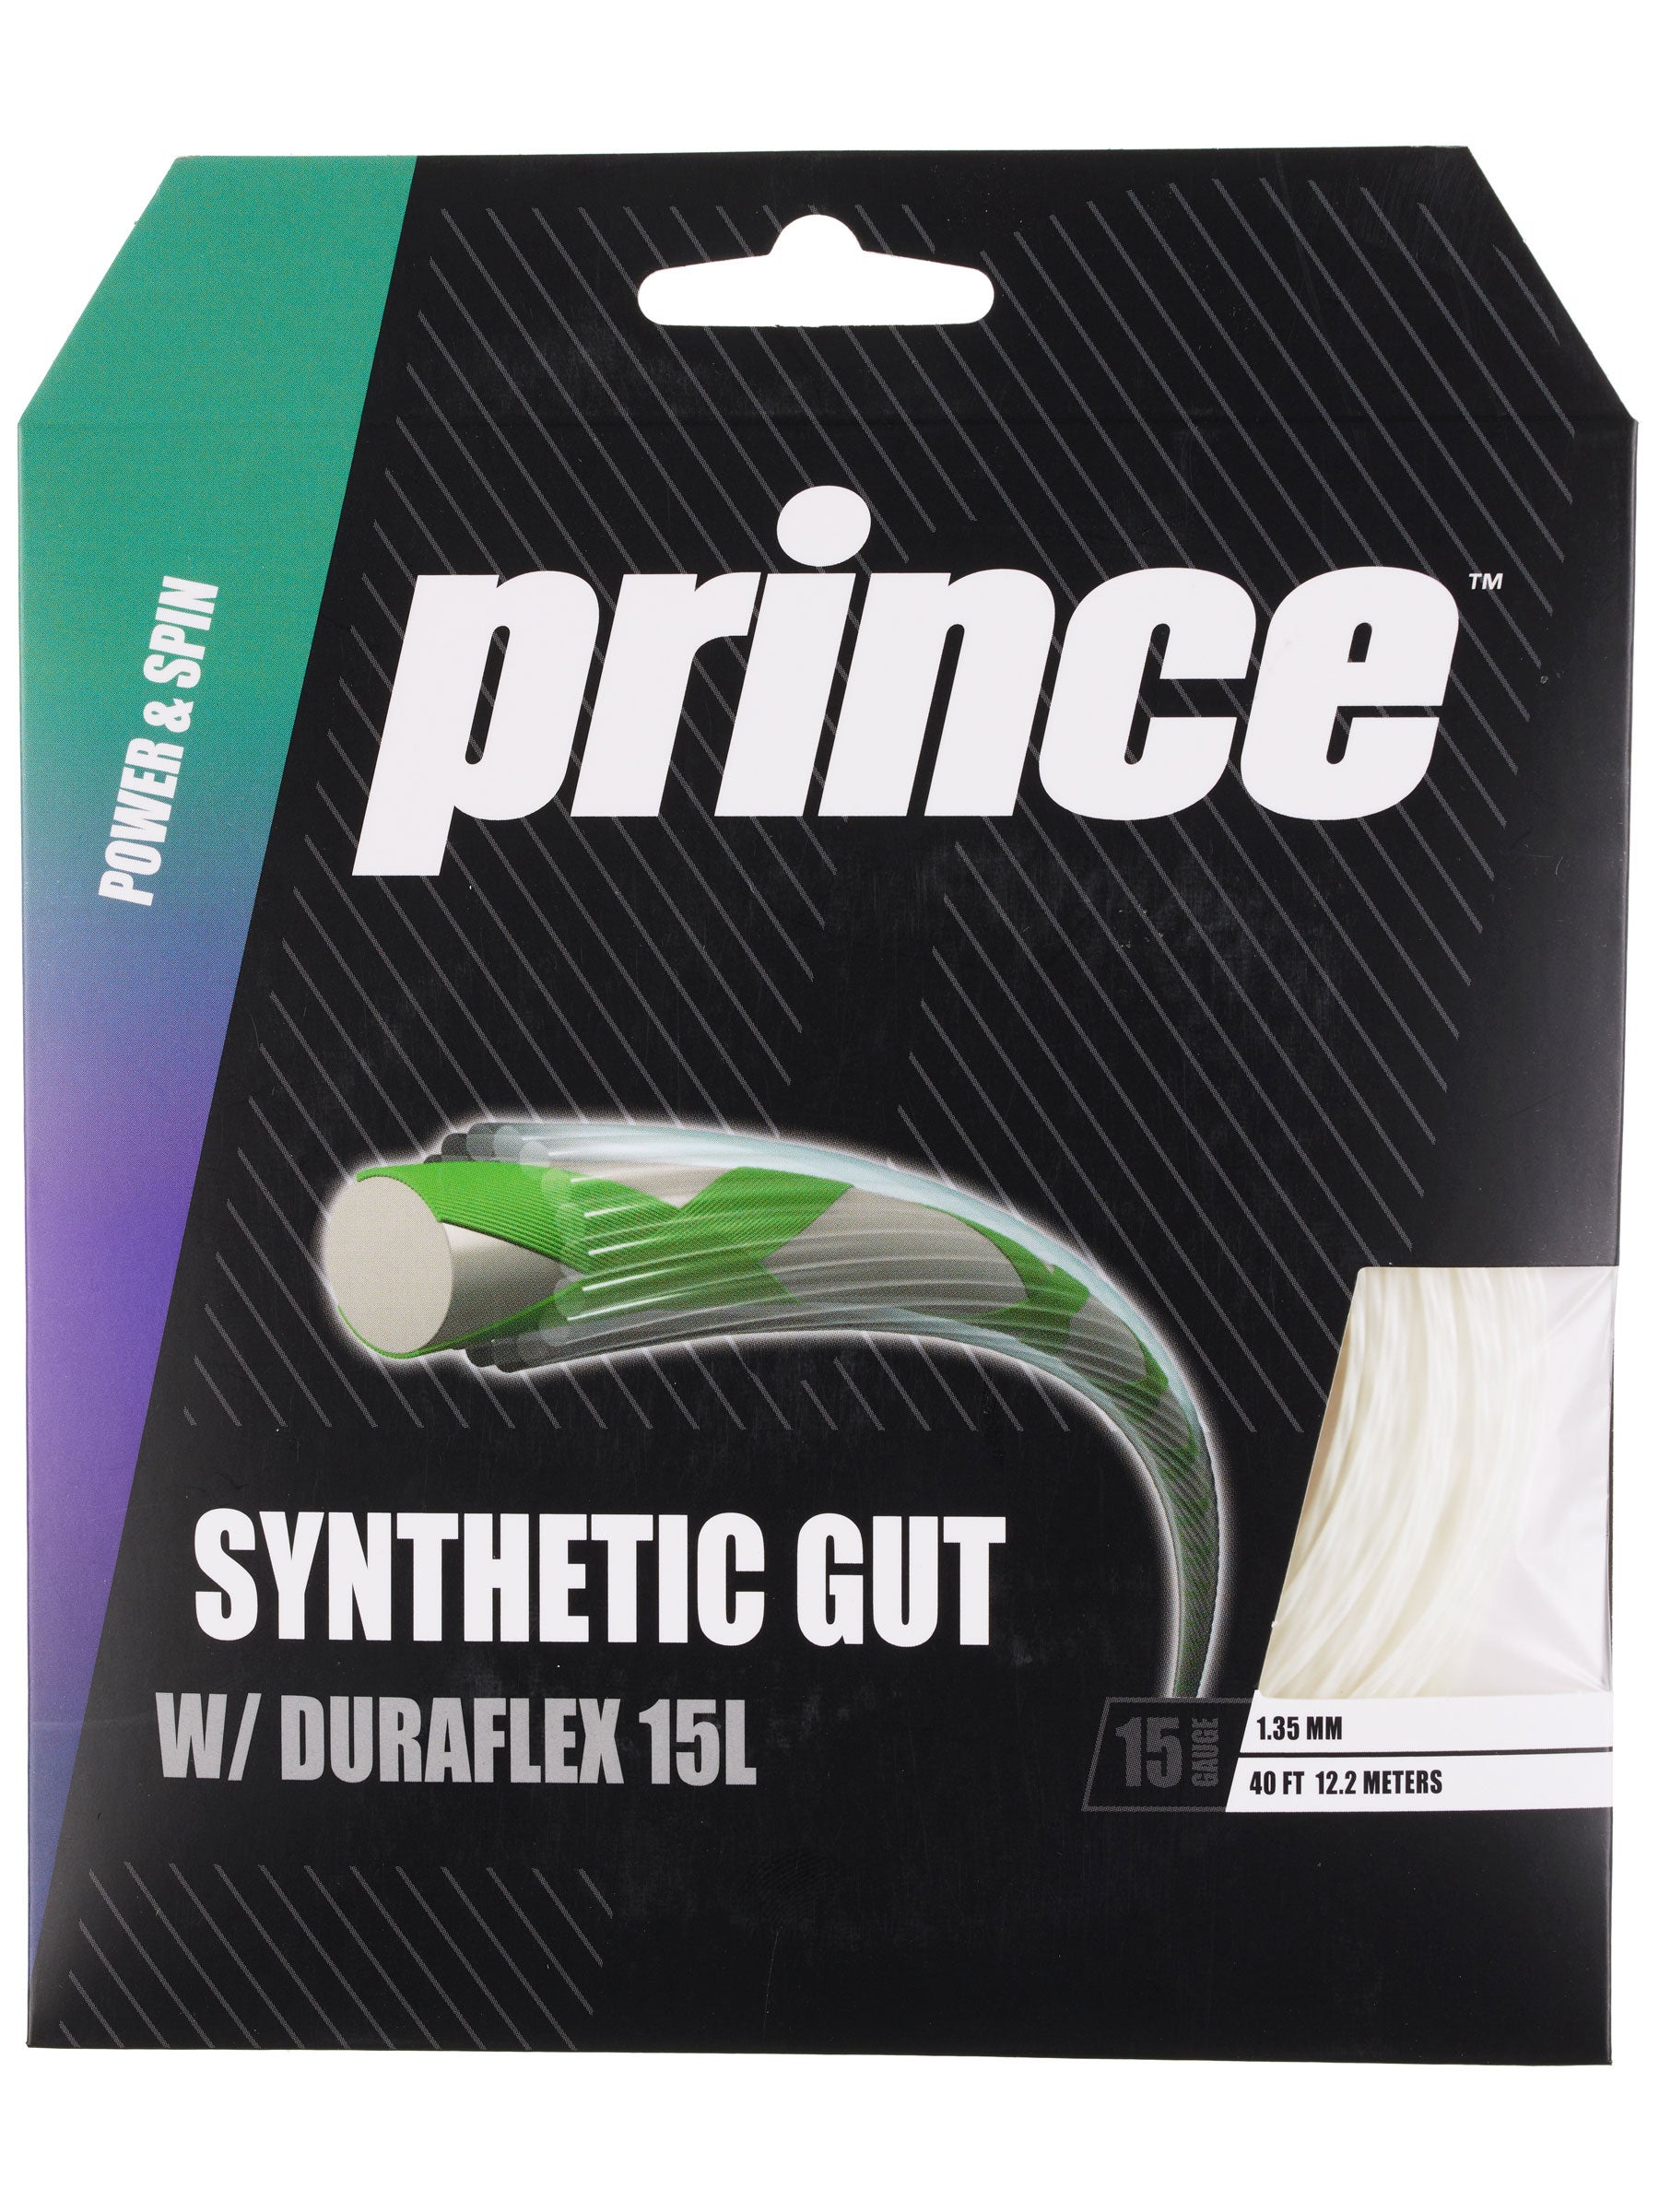 4 Pack Bundle of PRINCE Synthetic Gut 16 with Duraflex GREEN Authorized Dealer 